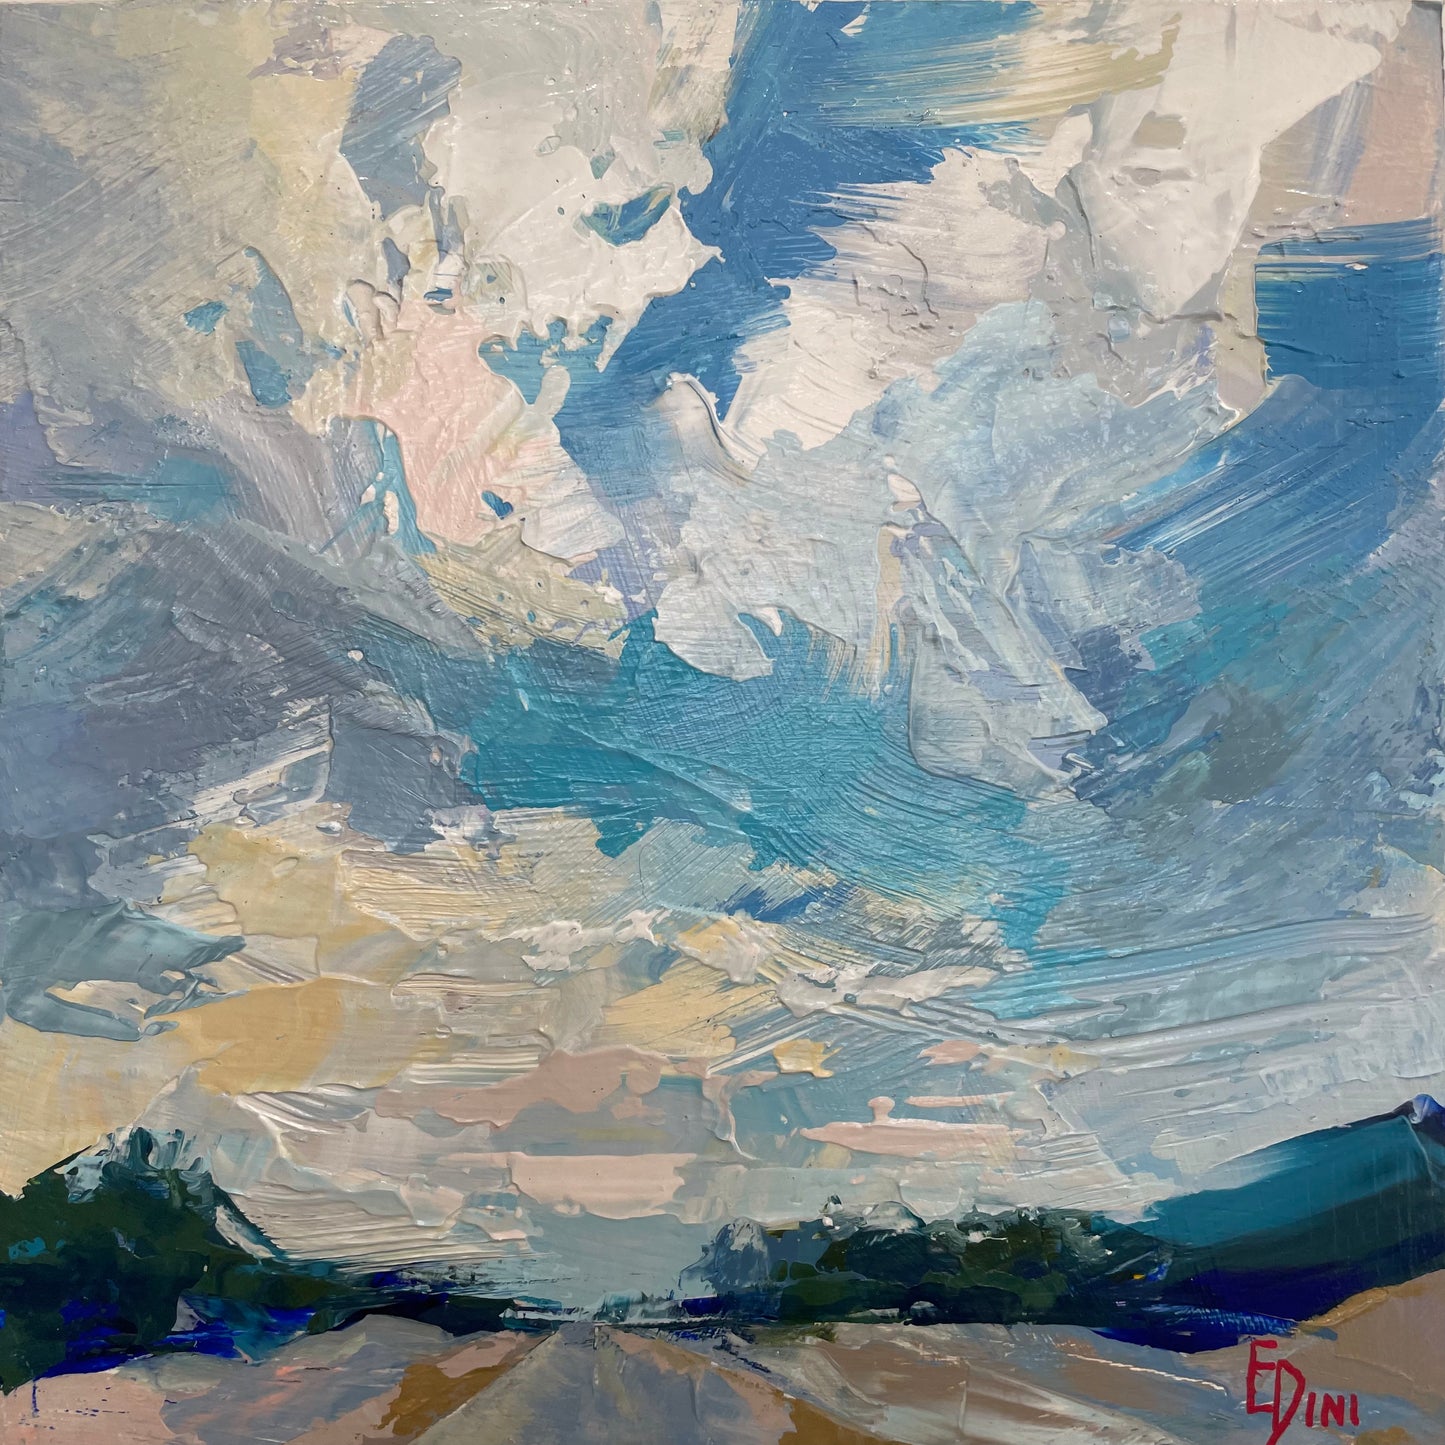 Sky Over The Road no. 2 by Elena Dinissuk